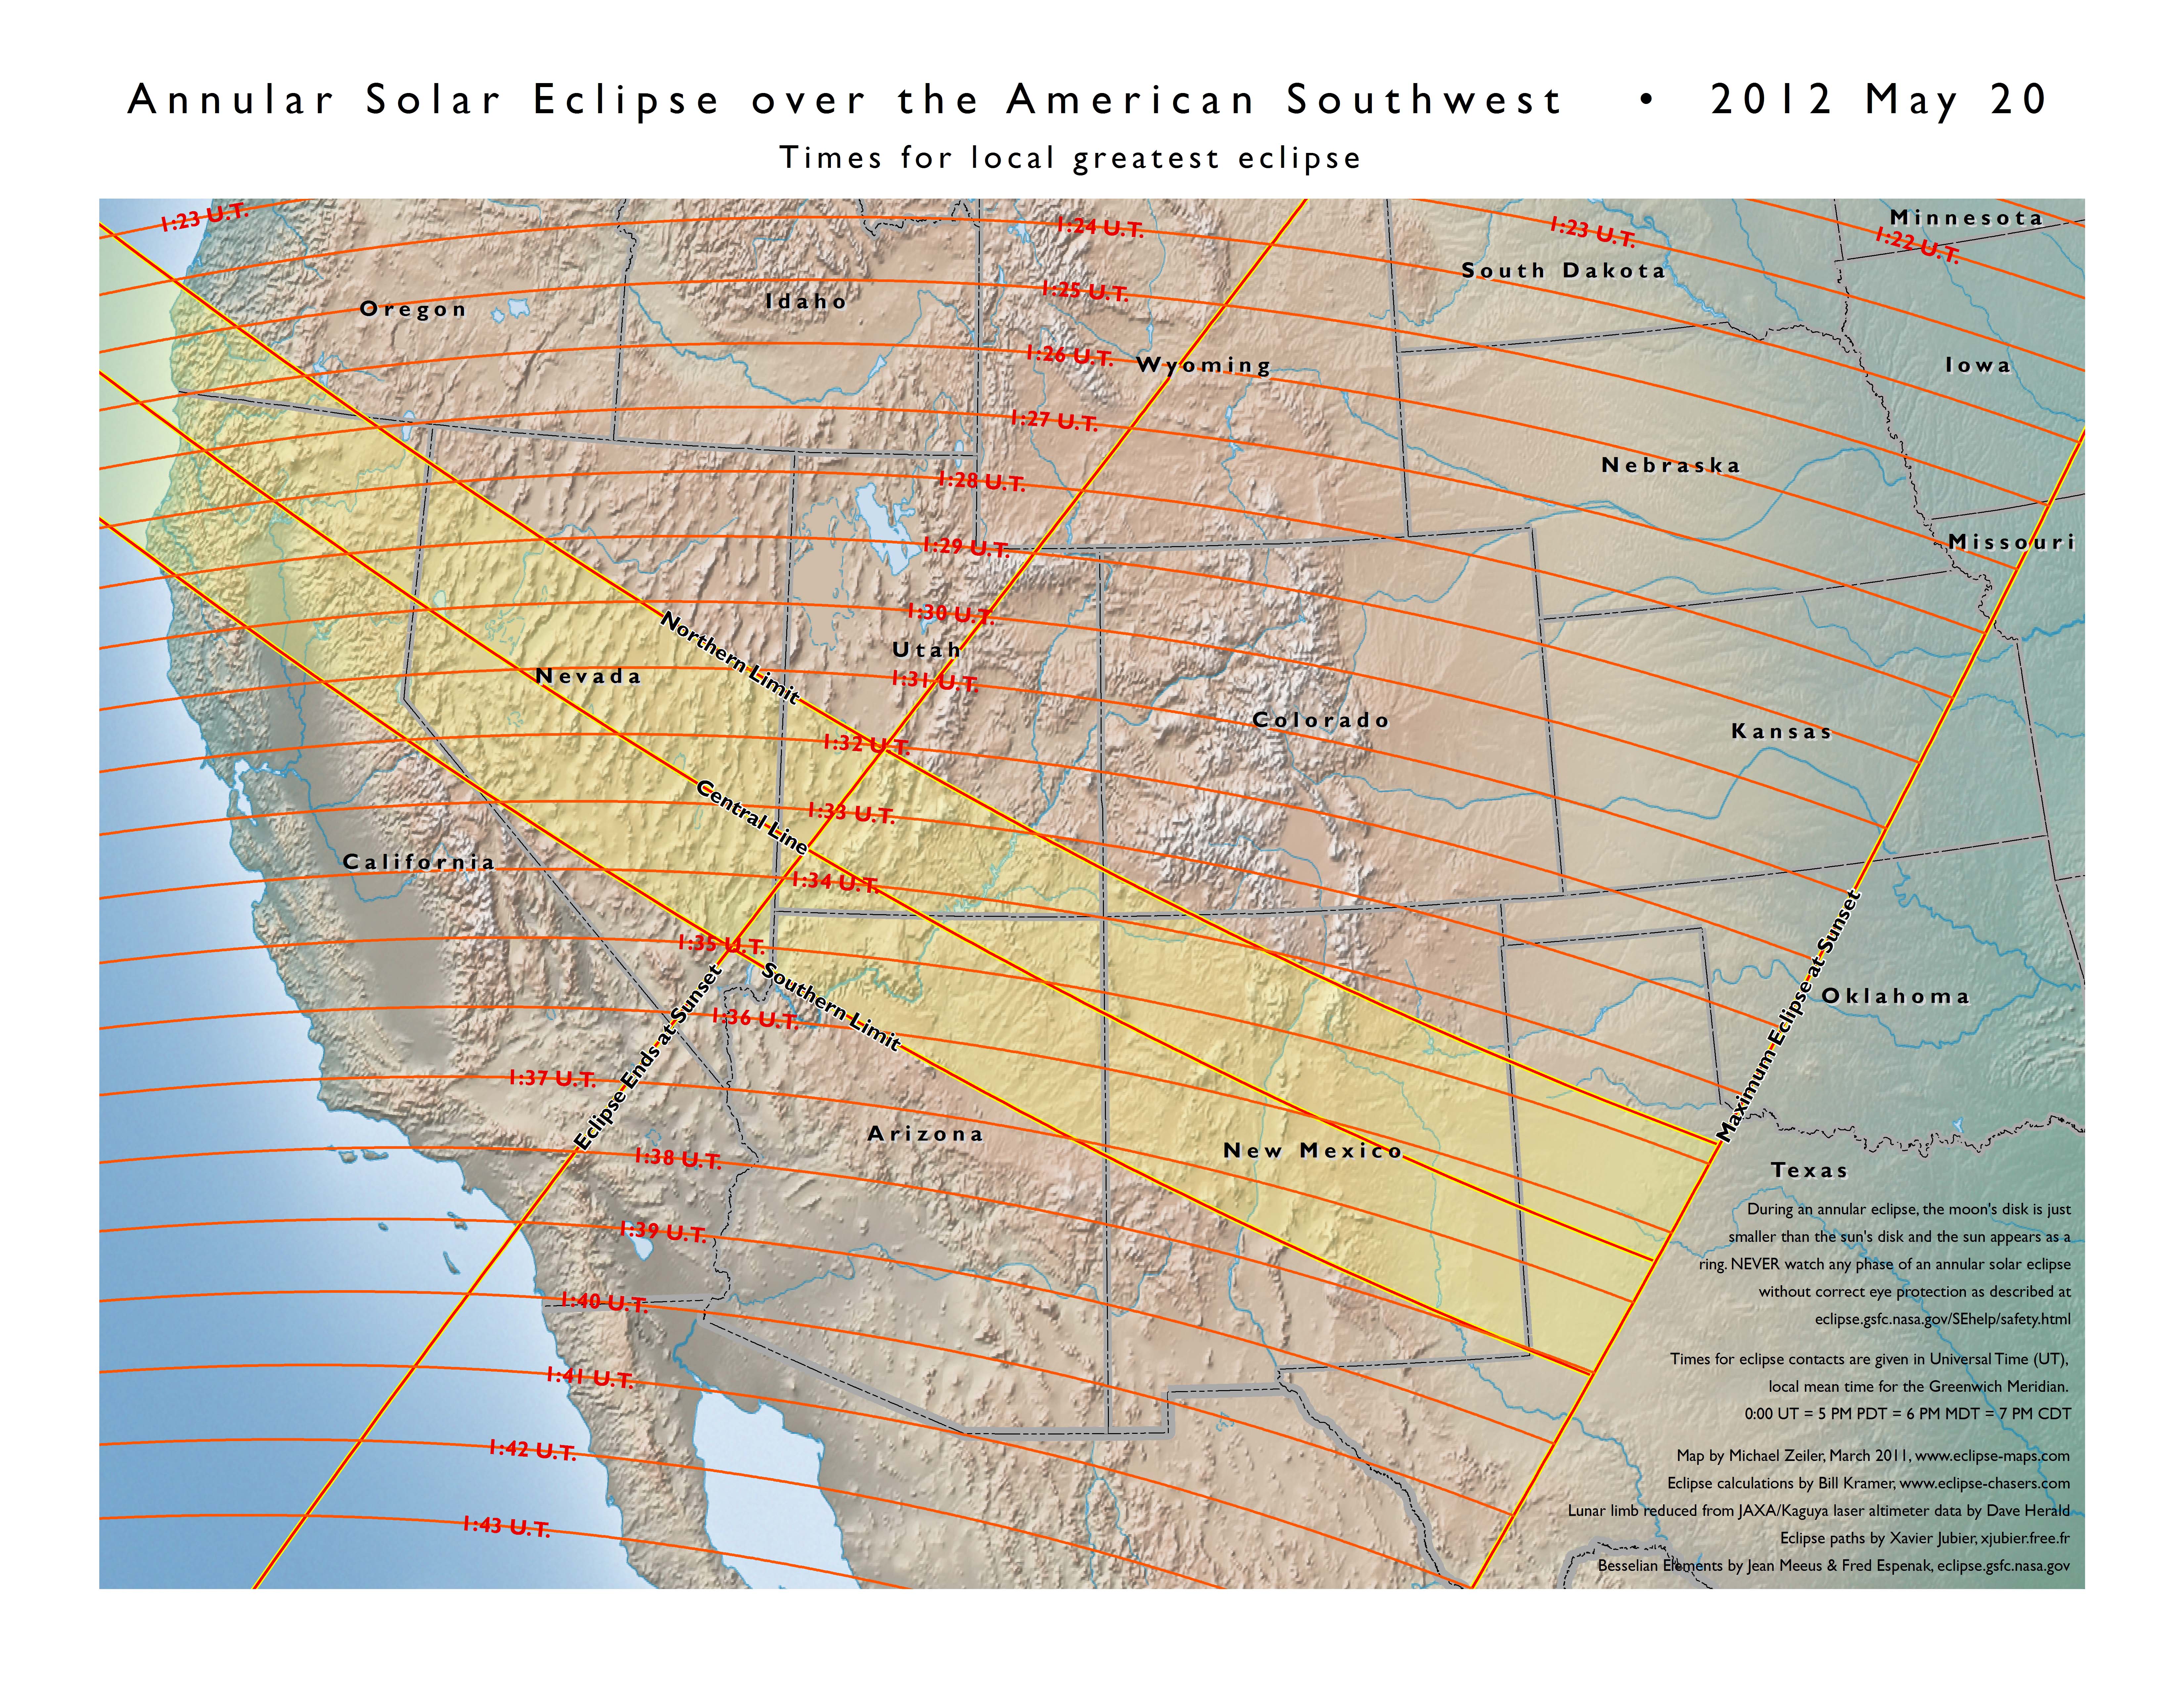 Annular solar eclipse of 2012 May 20